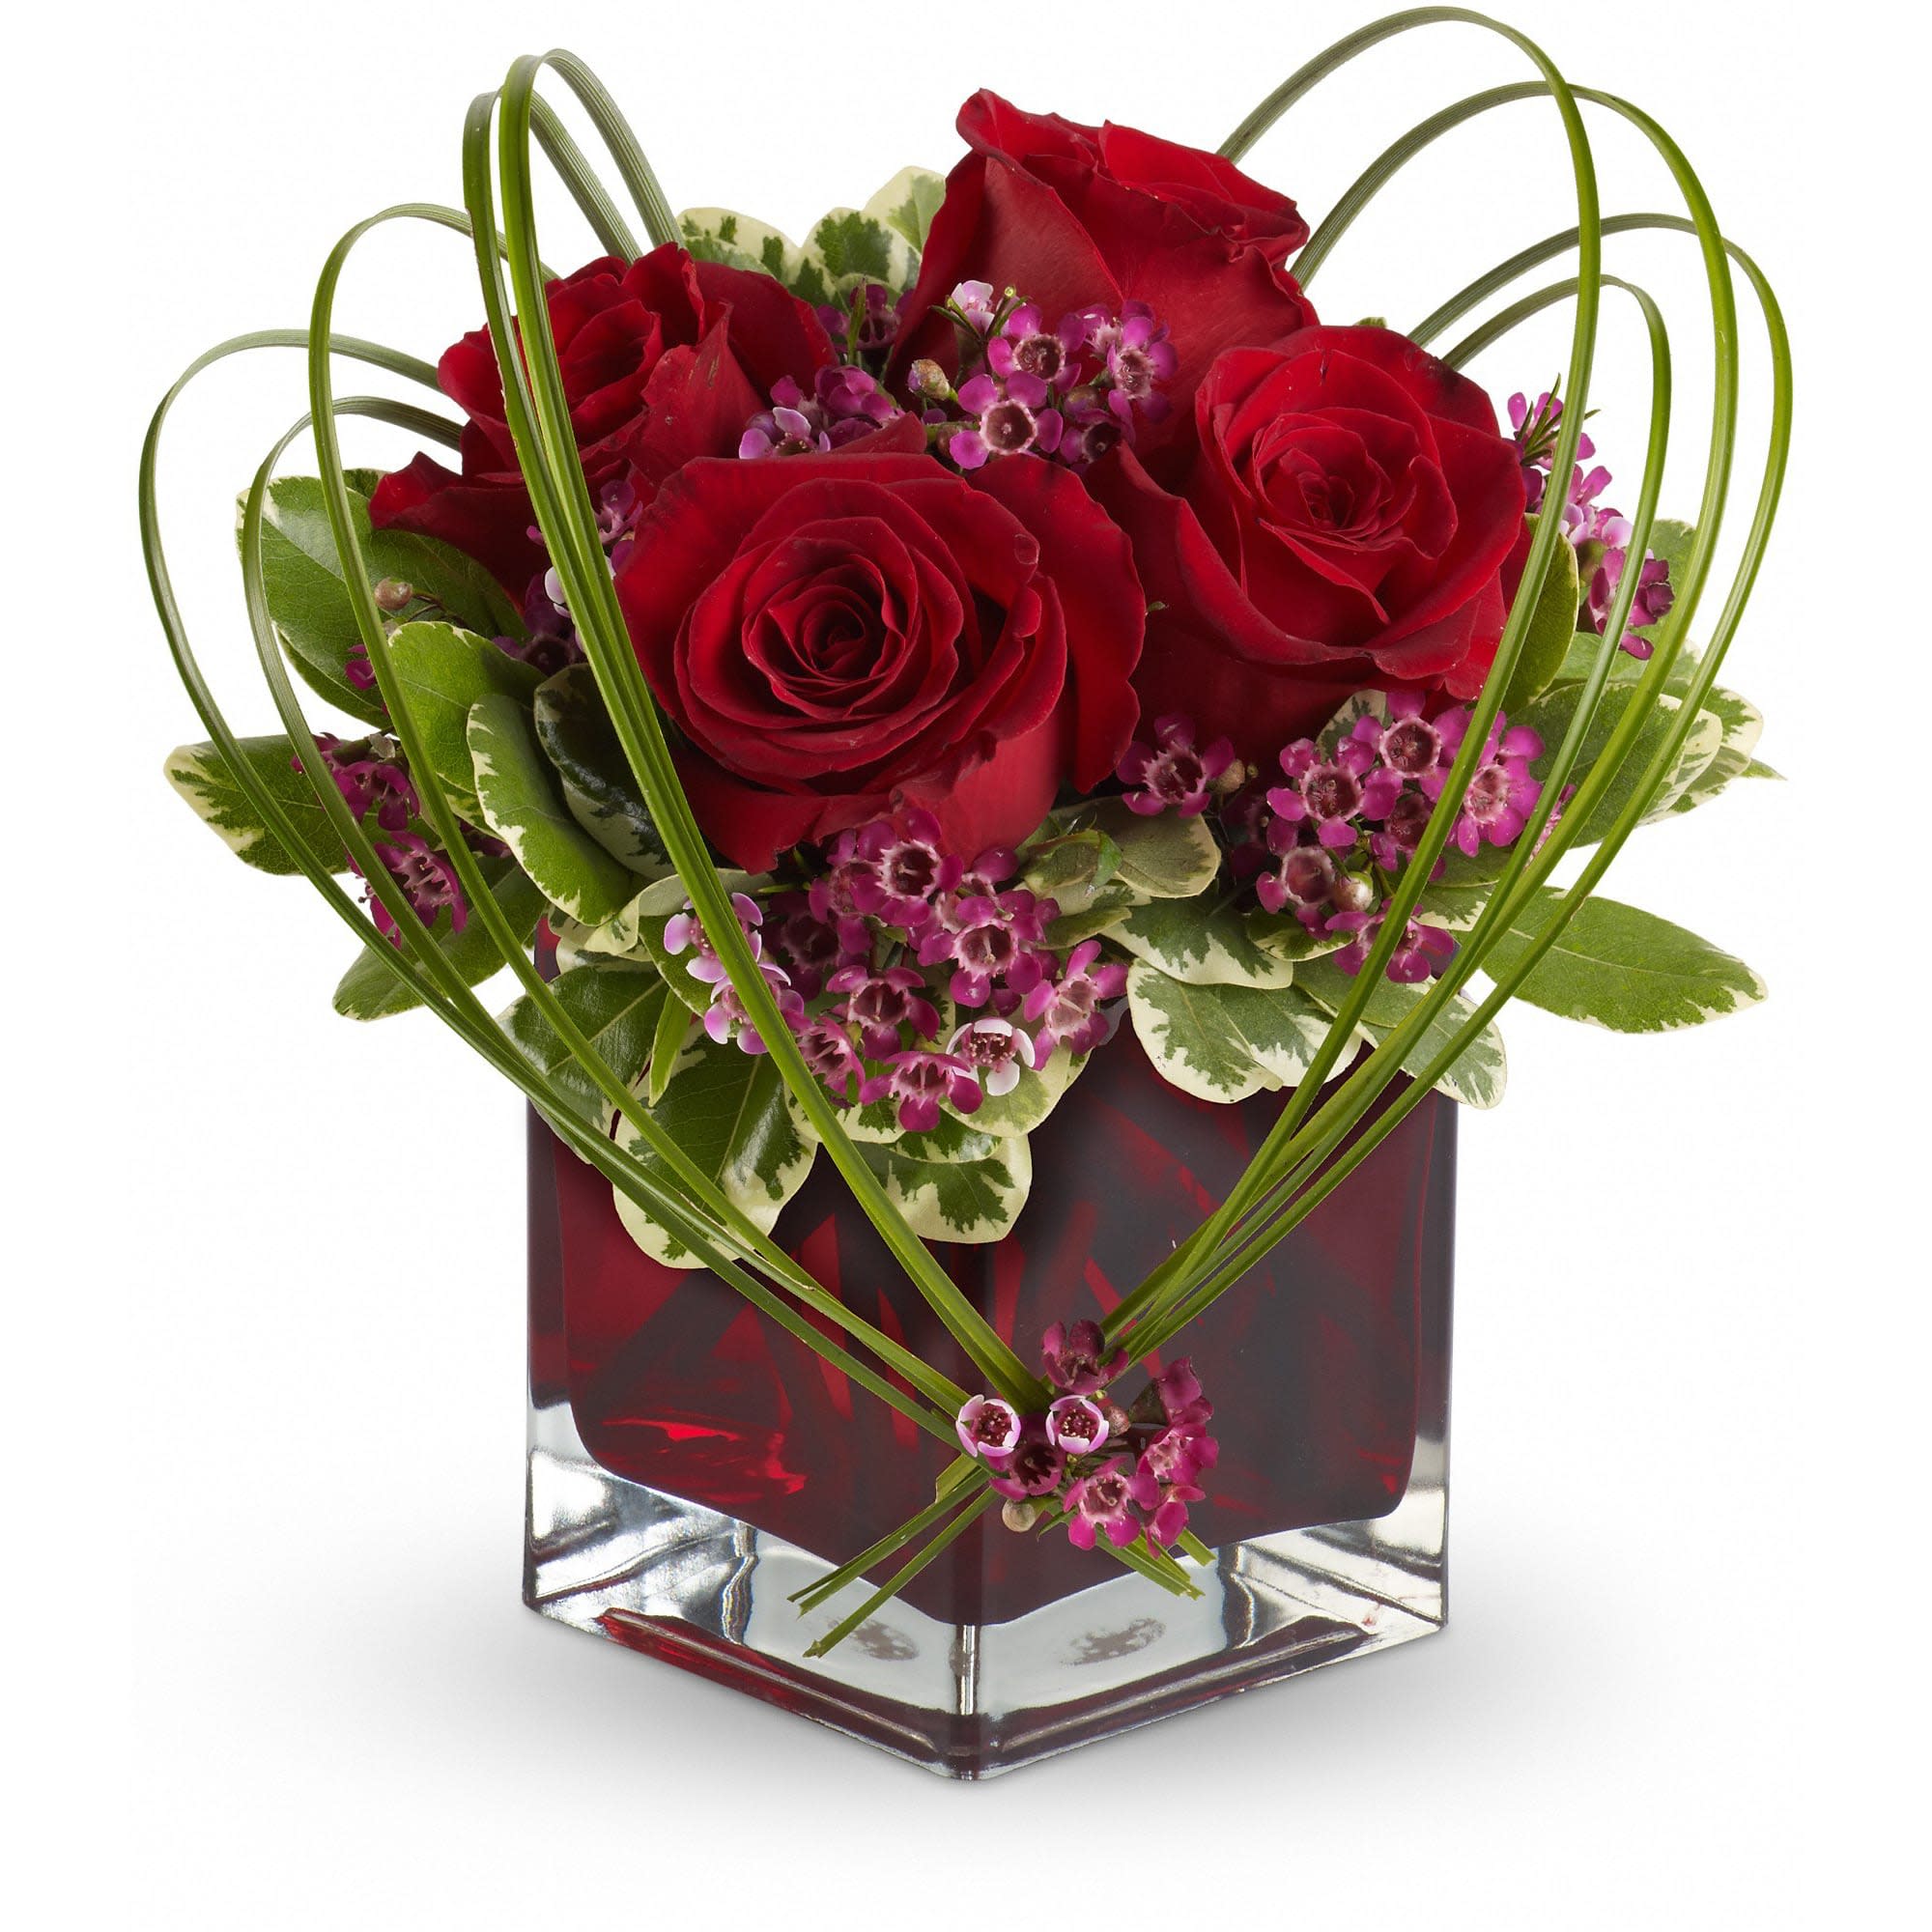 Teleflora's Sweet Thoughts Bouquet with Red Roses - If you'd like someone to think sweet thoughts about you, send them this delightful bouquet! A graceful heart of bear grass is tied with purple waxflower, and appears to float above red roses nestled in a ruby-red glass vase. How sweet it is!  